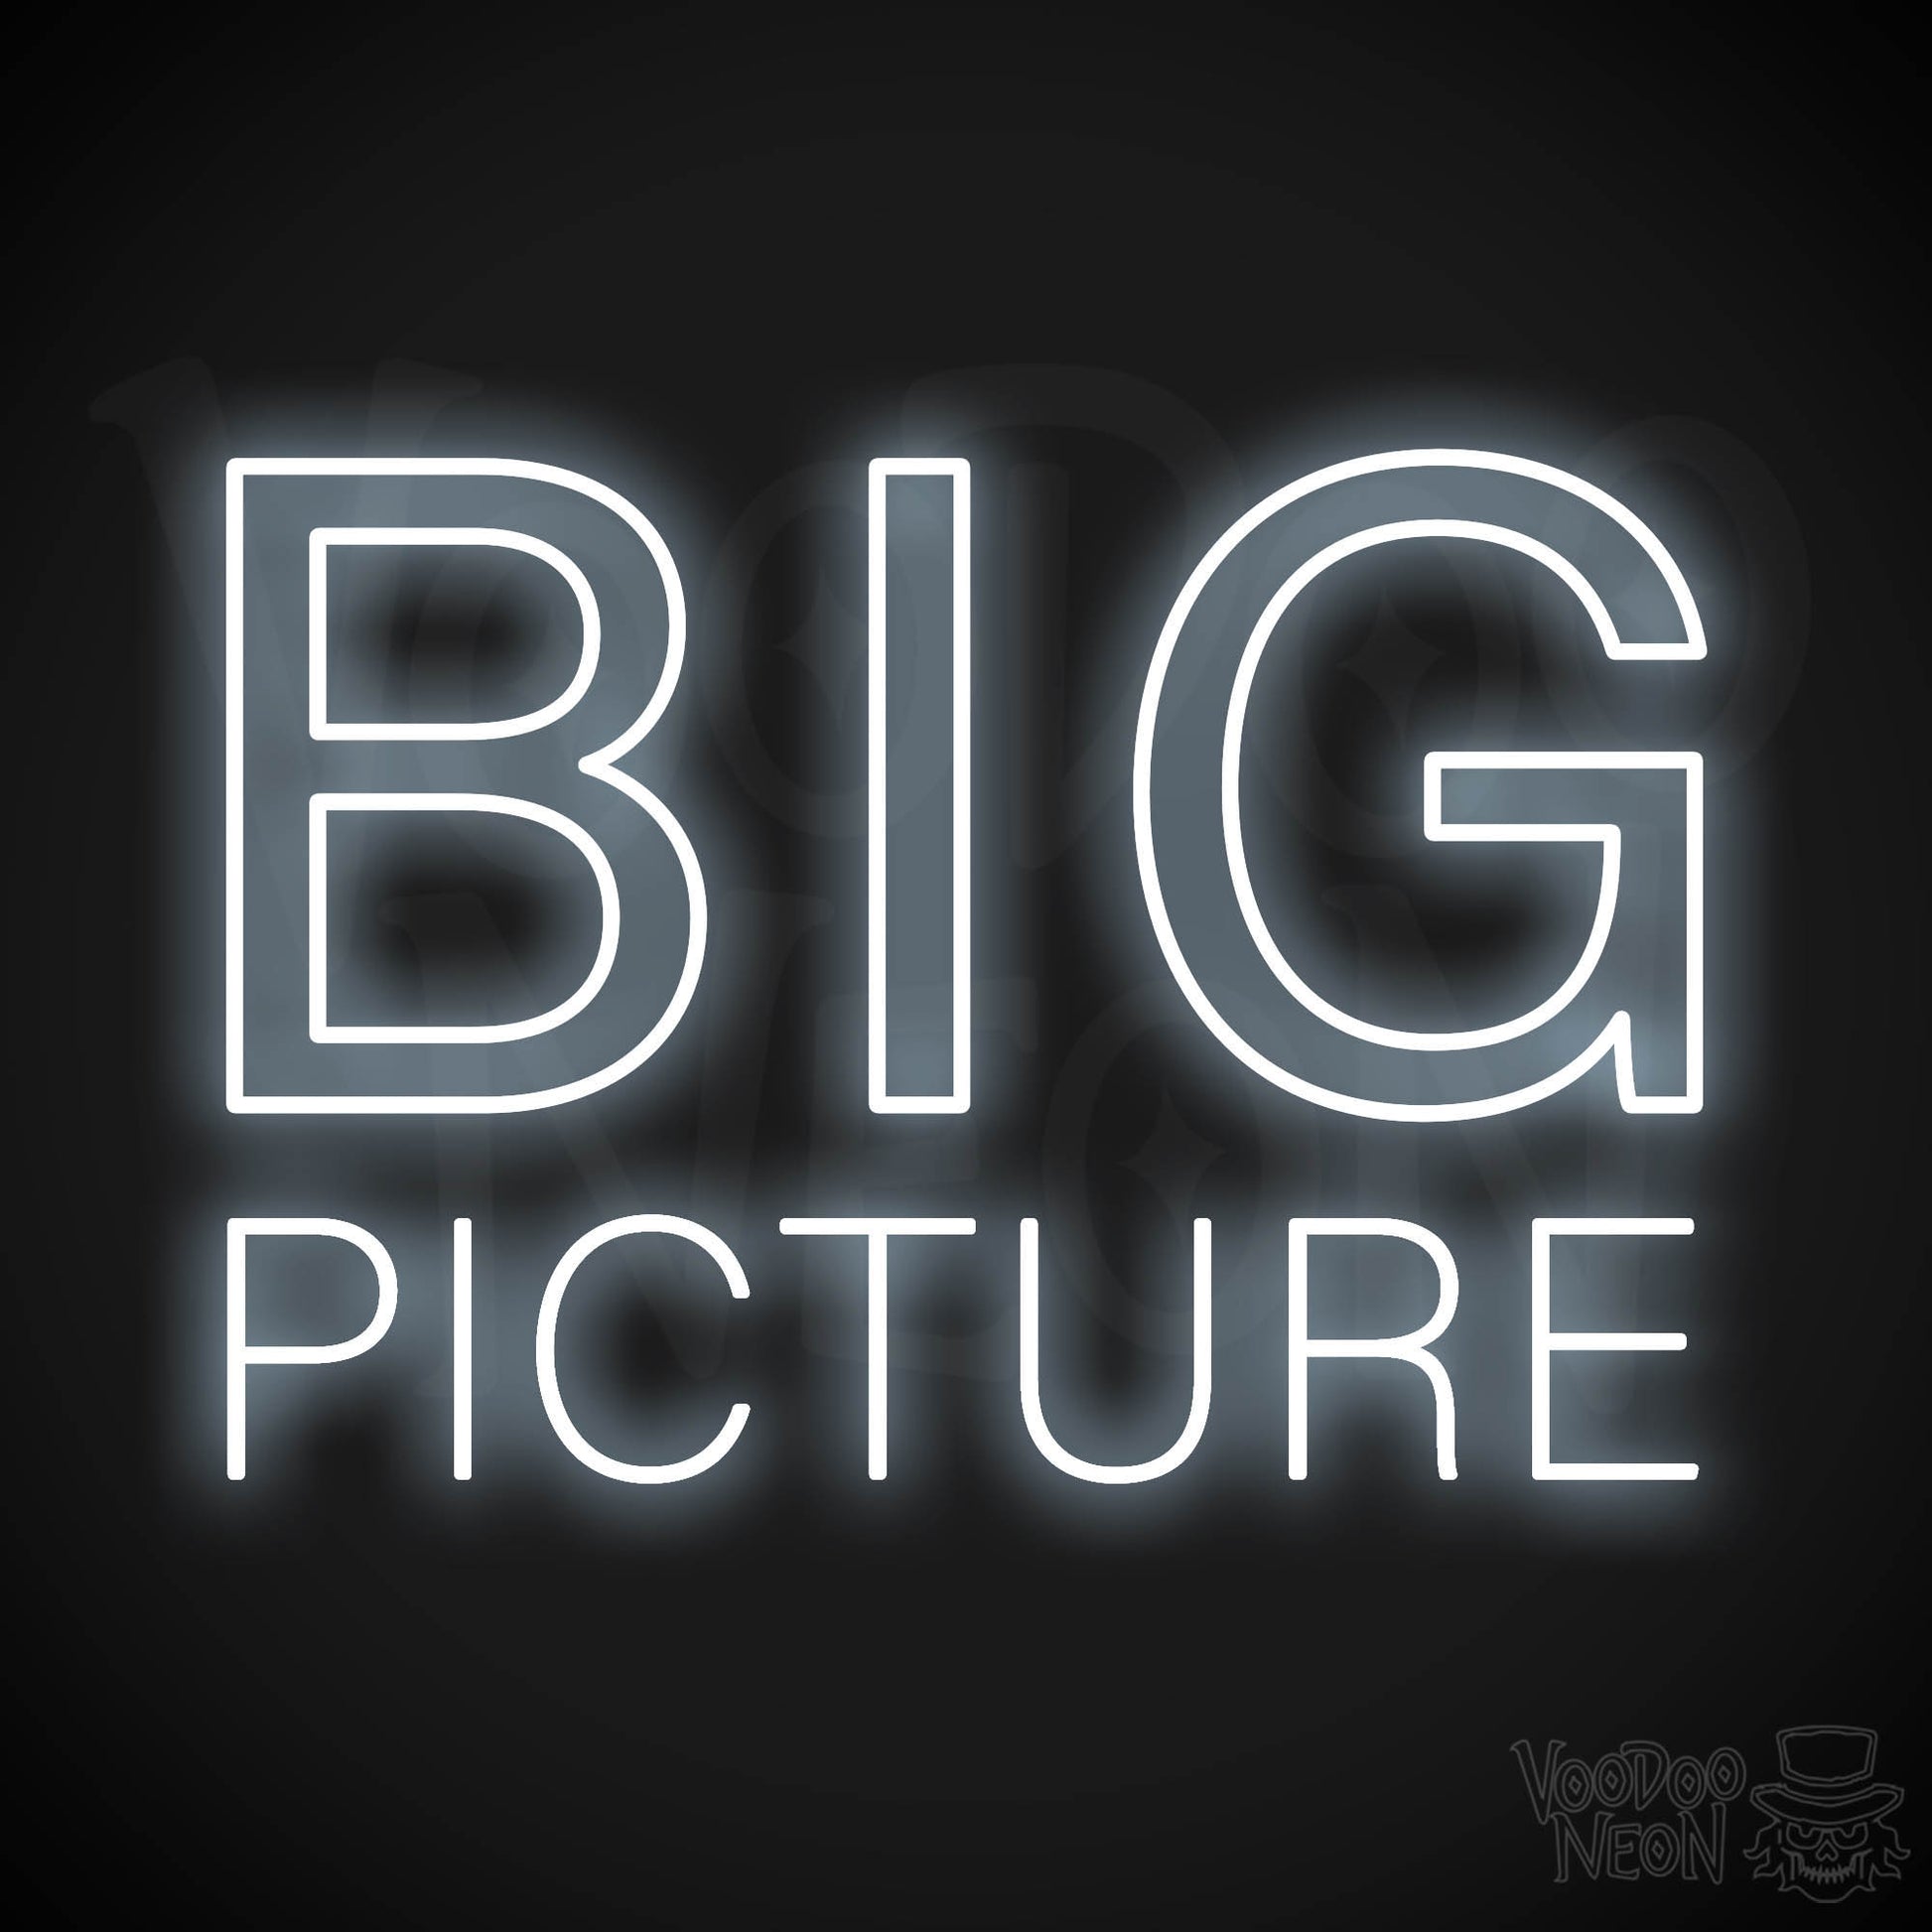 Big Picture LED Neon - Cool White